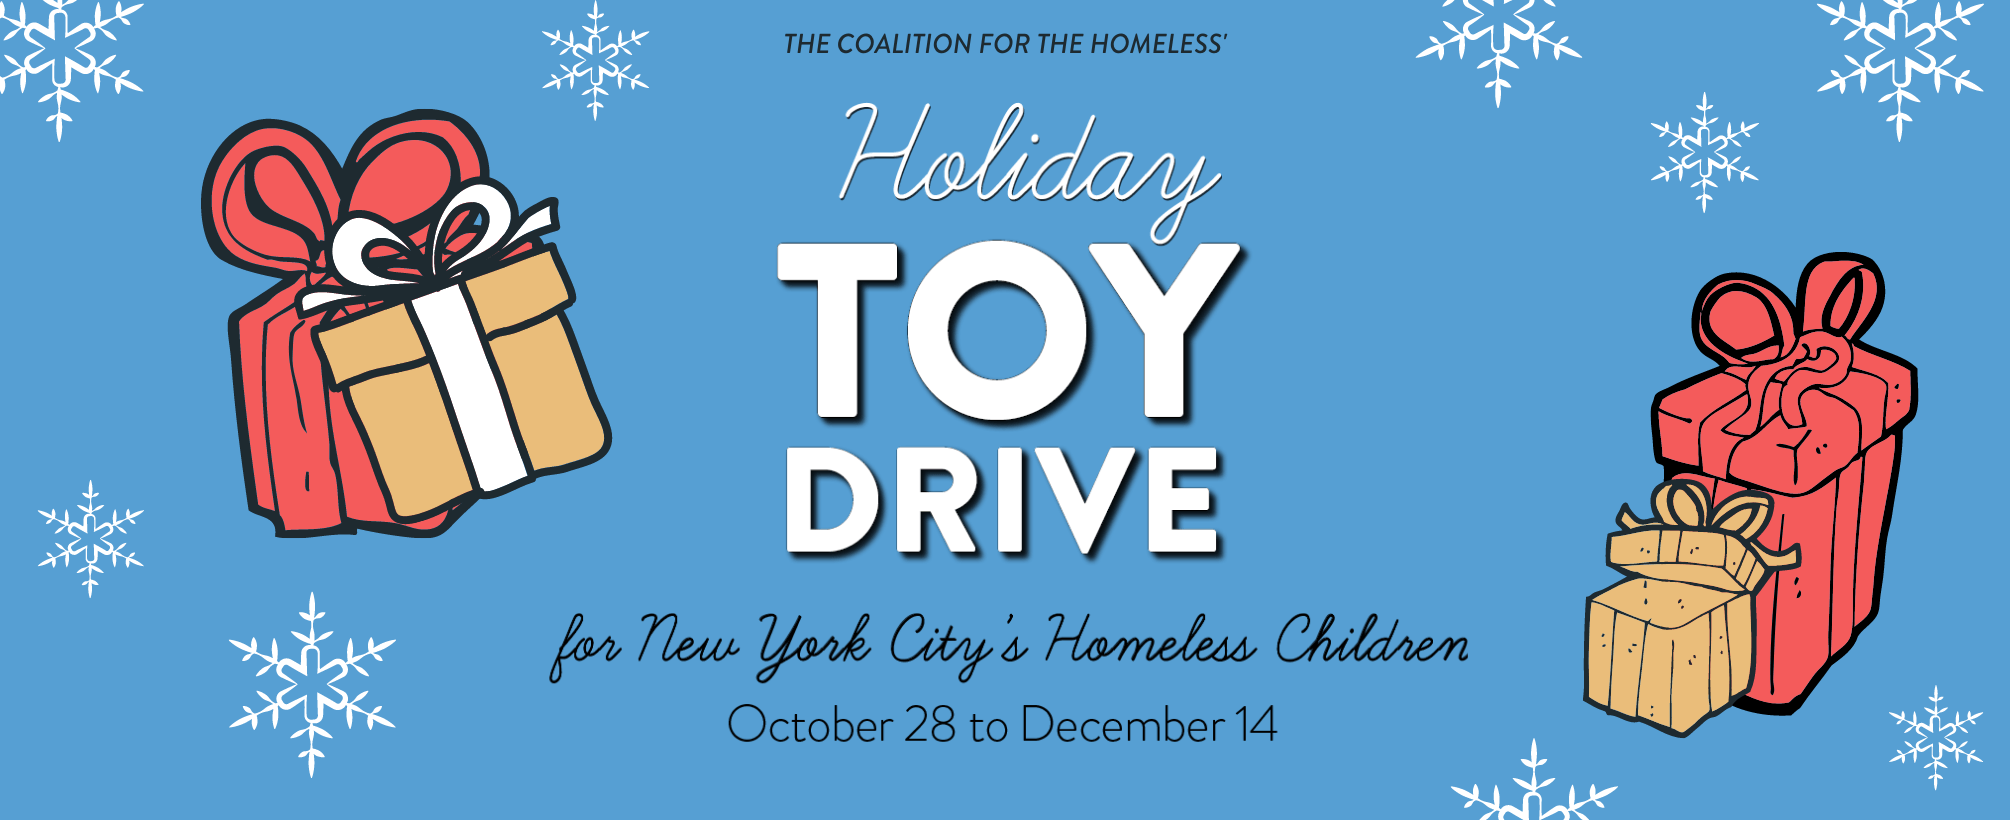 2020 Holiday Toy Drive Coalition For The Homeless